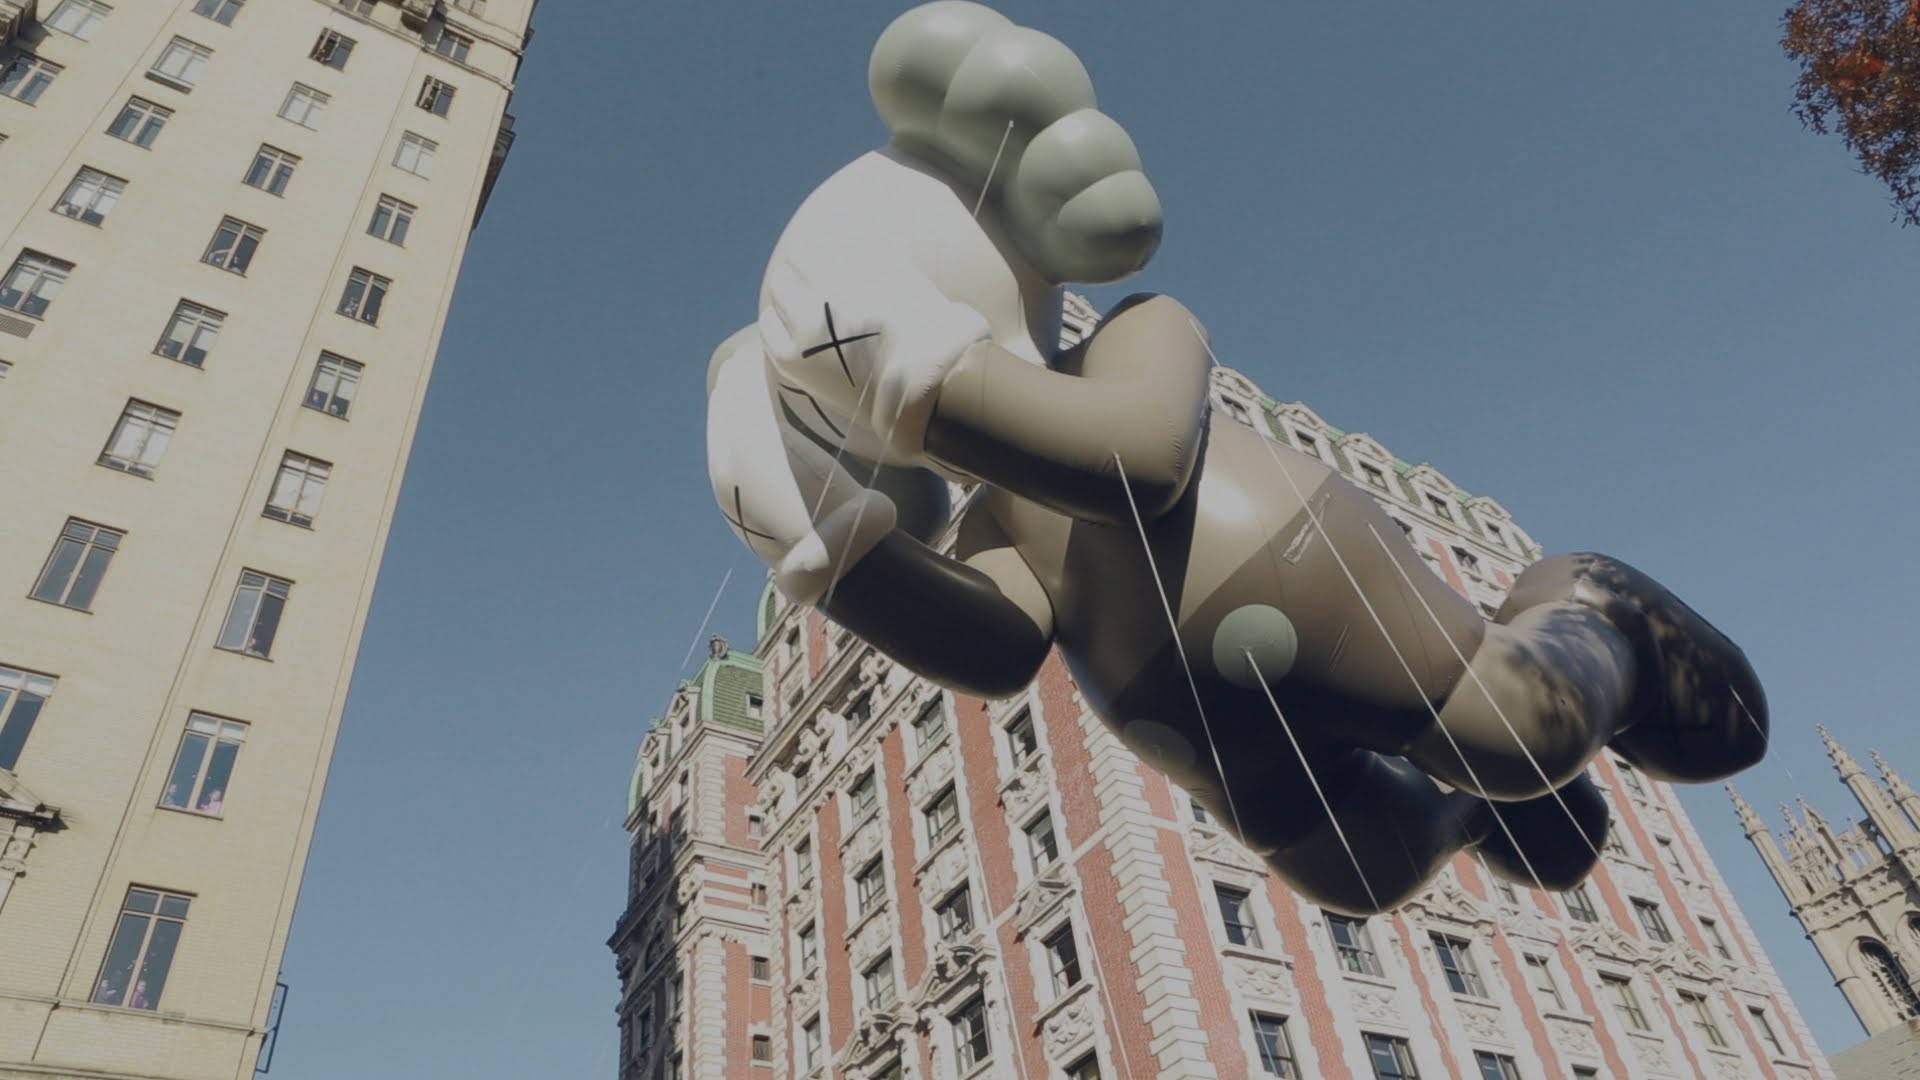 Kaws 1920X1080 Wallpaper and Background Image